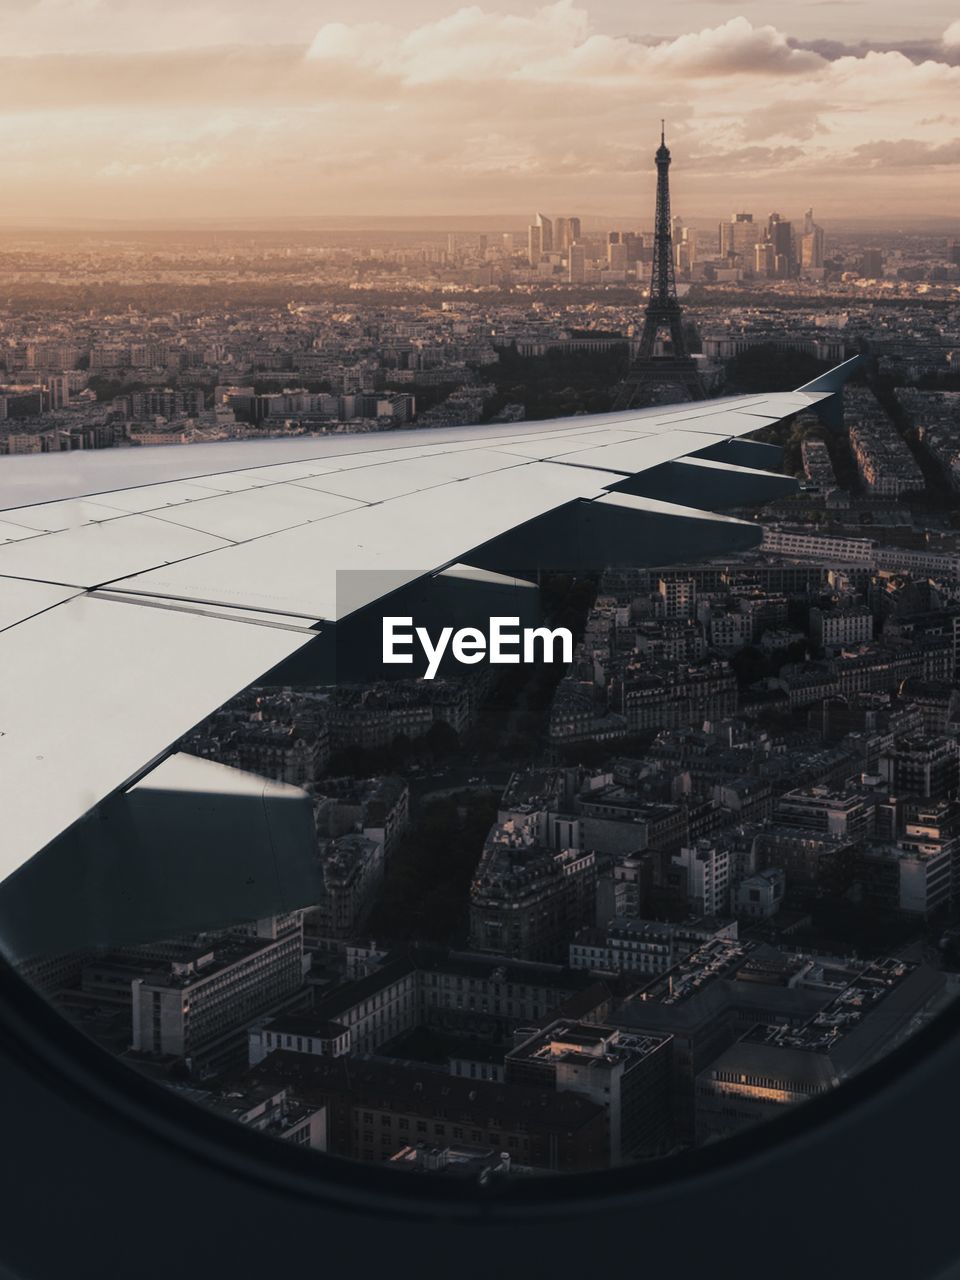 Cropped image of airplane wing over cityscape seen through window during sunset